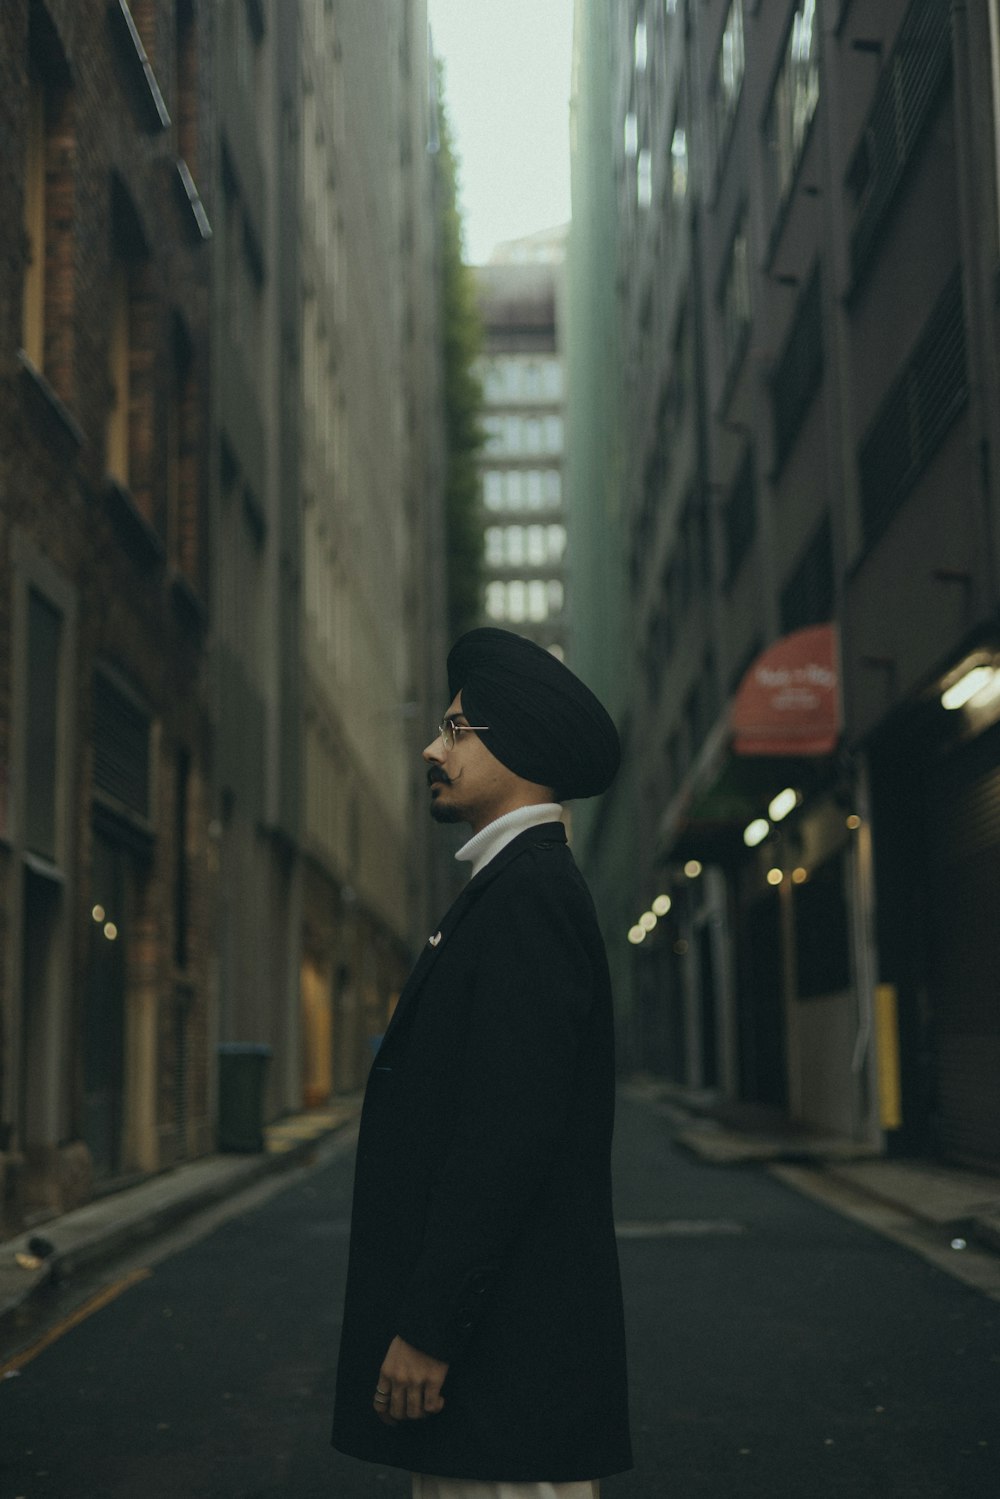 a man in a turban standing in an alleyway